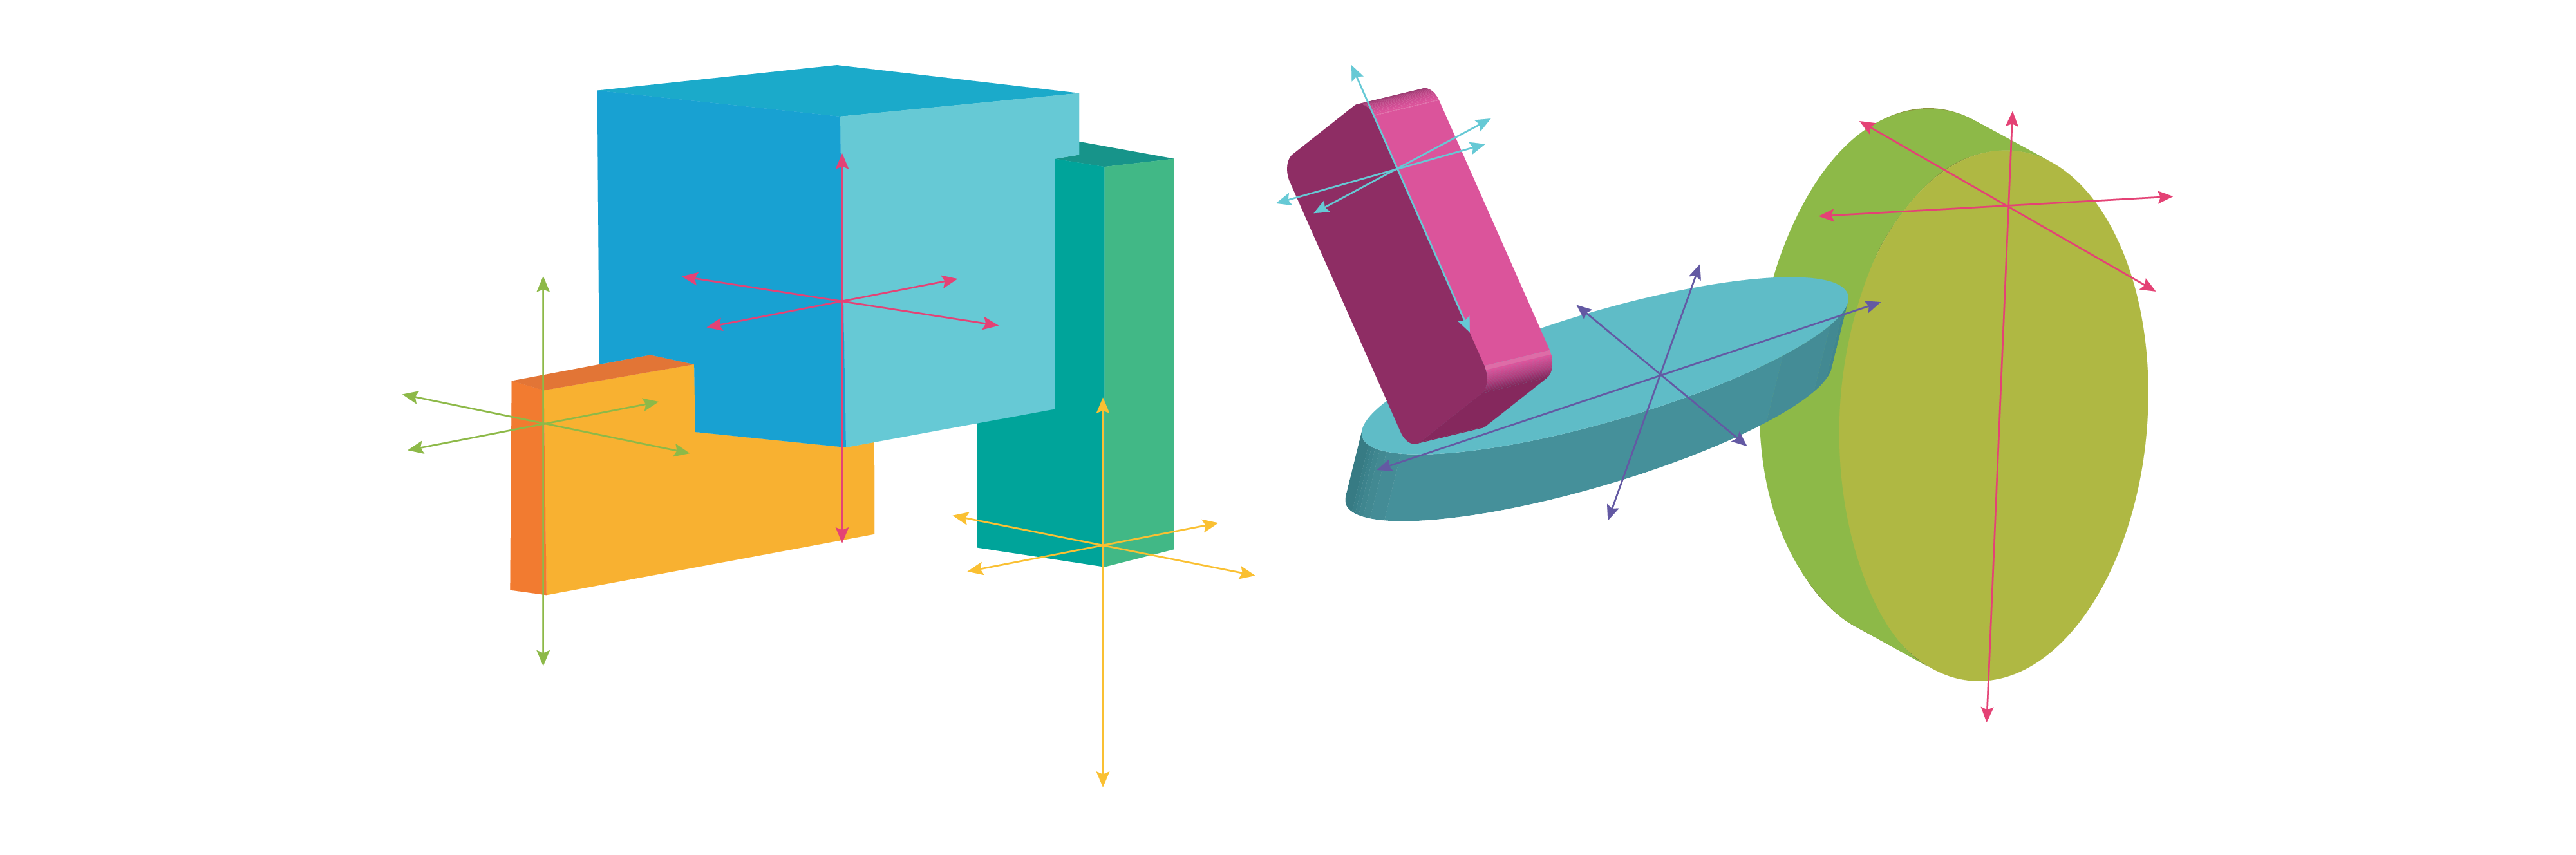 Two images illustrate a Static Axes Composition on the left, and a Dynamic Axes Composition on the right. On the left, a large blue box sits vertically on an orange plane, wedged into a tall, green rectilinear form. On the right, 3 forms are attached at dynamic angles: a blue oval slice, a green oval slice, and a pink rectilinear form.